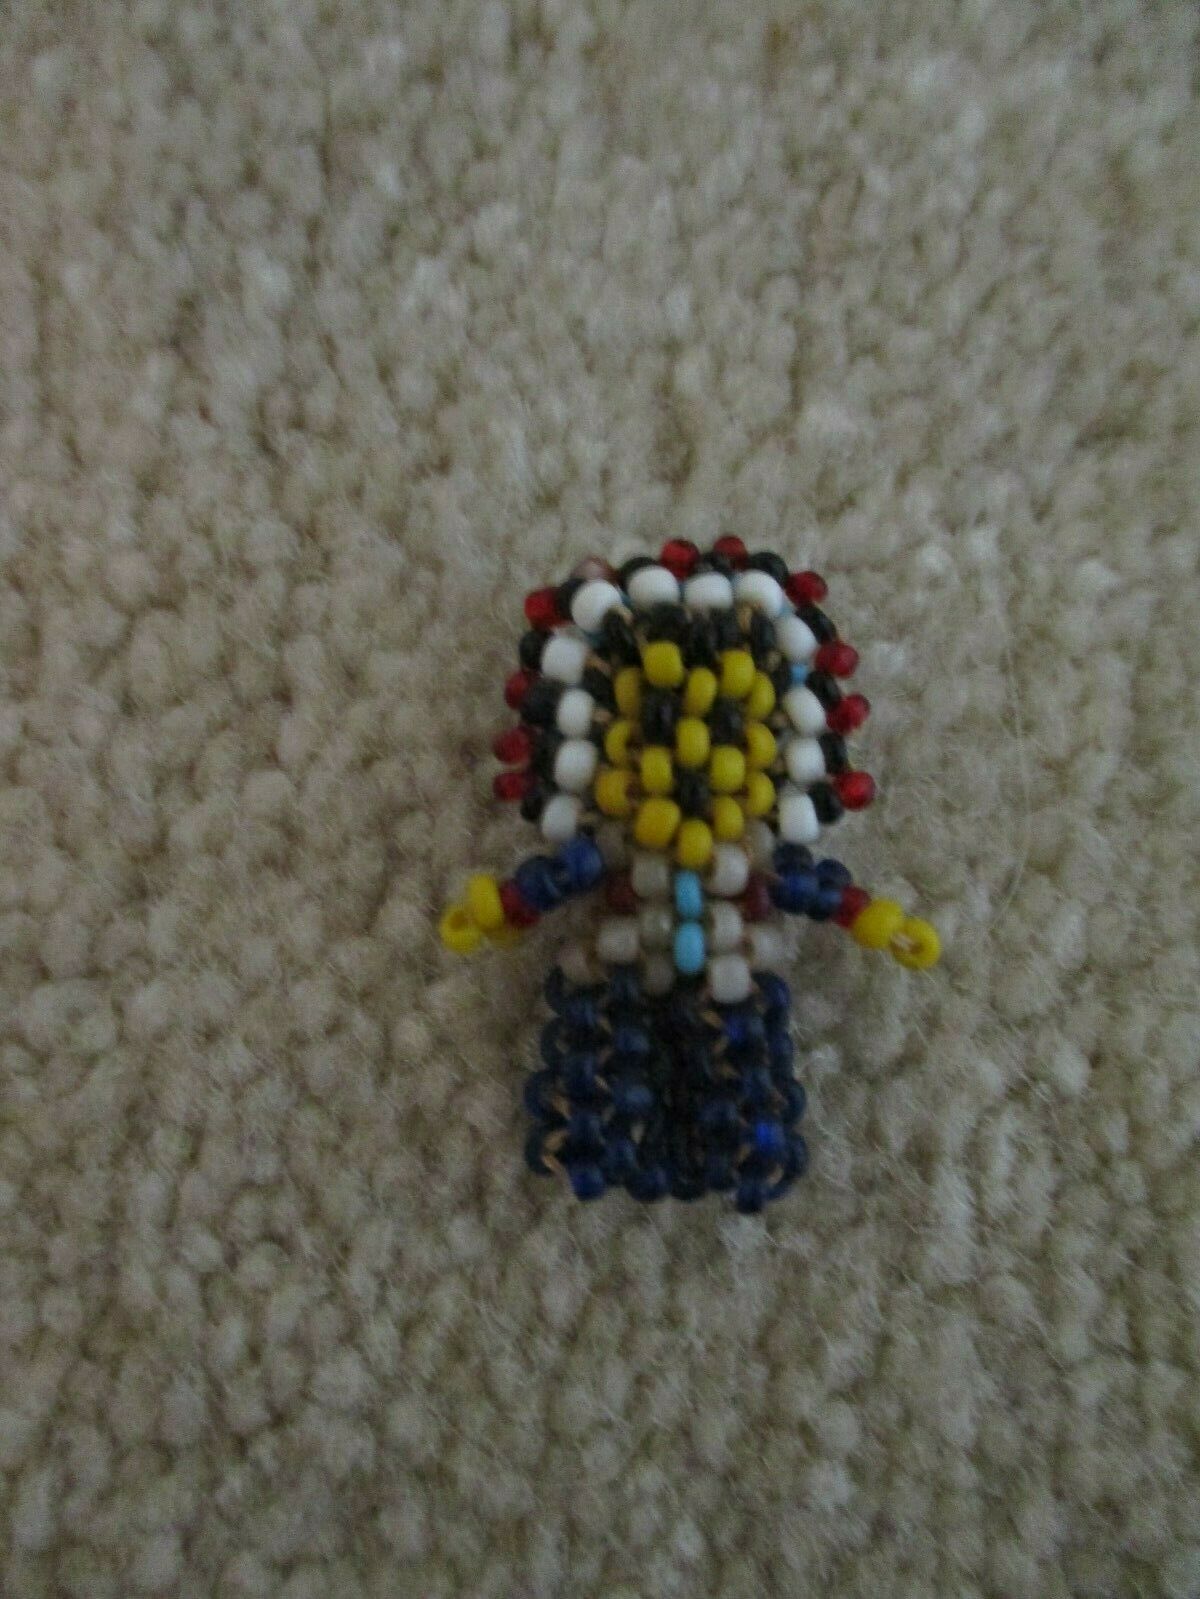 Vintage New! Hand Beaded Miniature Doll W/"loop" For Wearing As Necklace, 1 1/4"